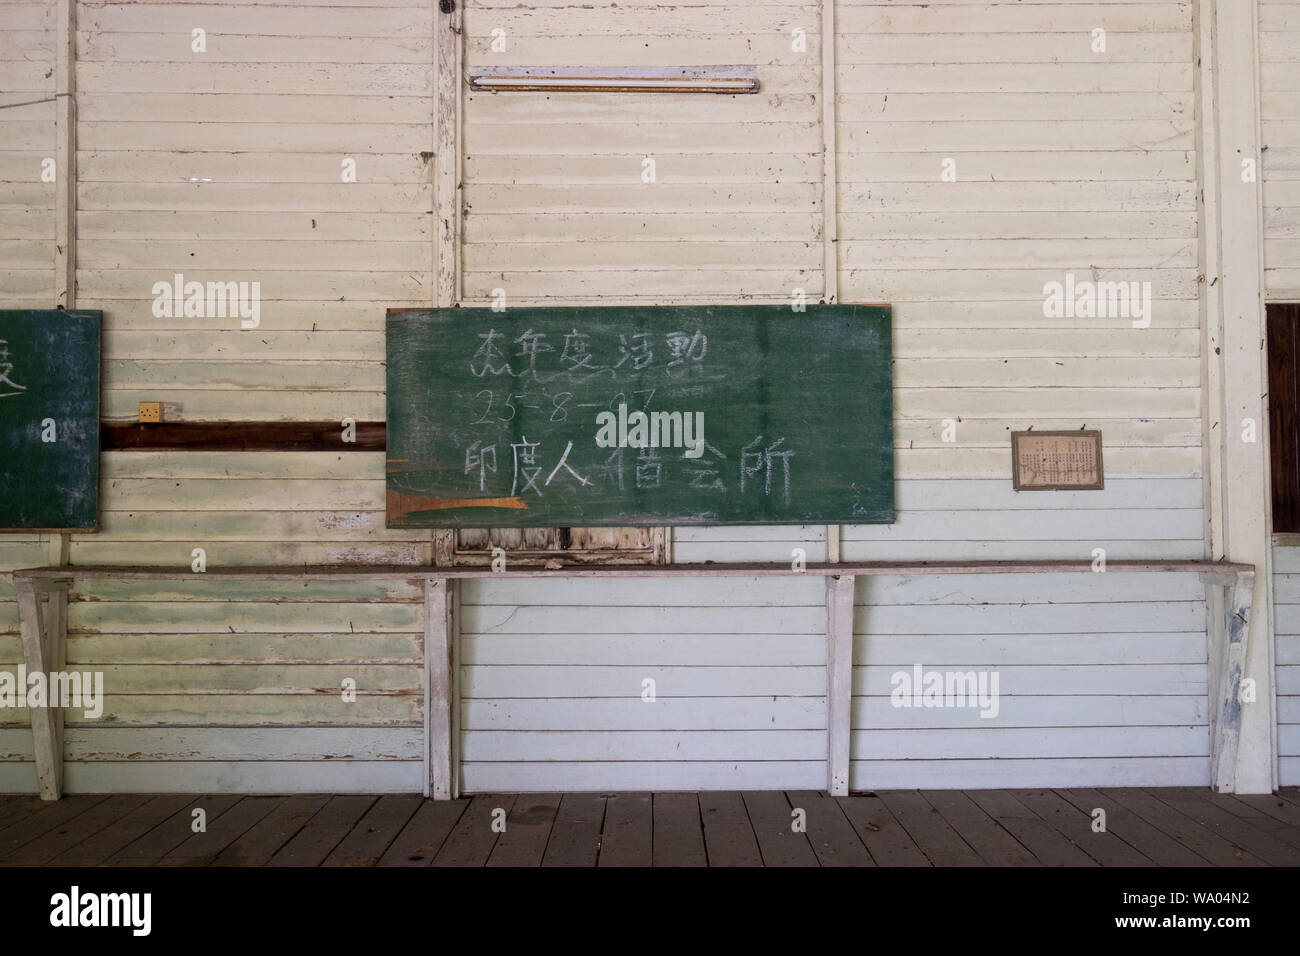 A green chalkboard with Chinese lettering is mounted on the wall of an old, wooden, colony-era hall in Port Dickson, Malaysia. Stock Photo